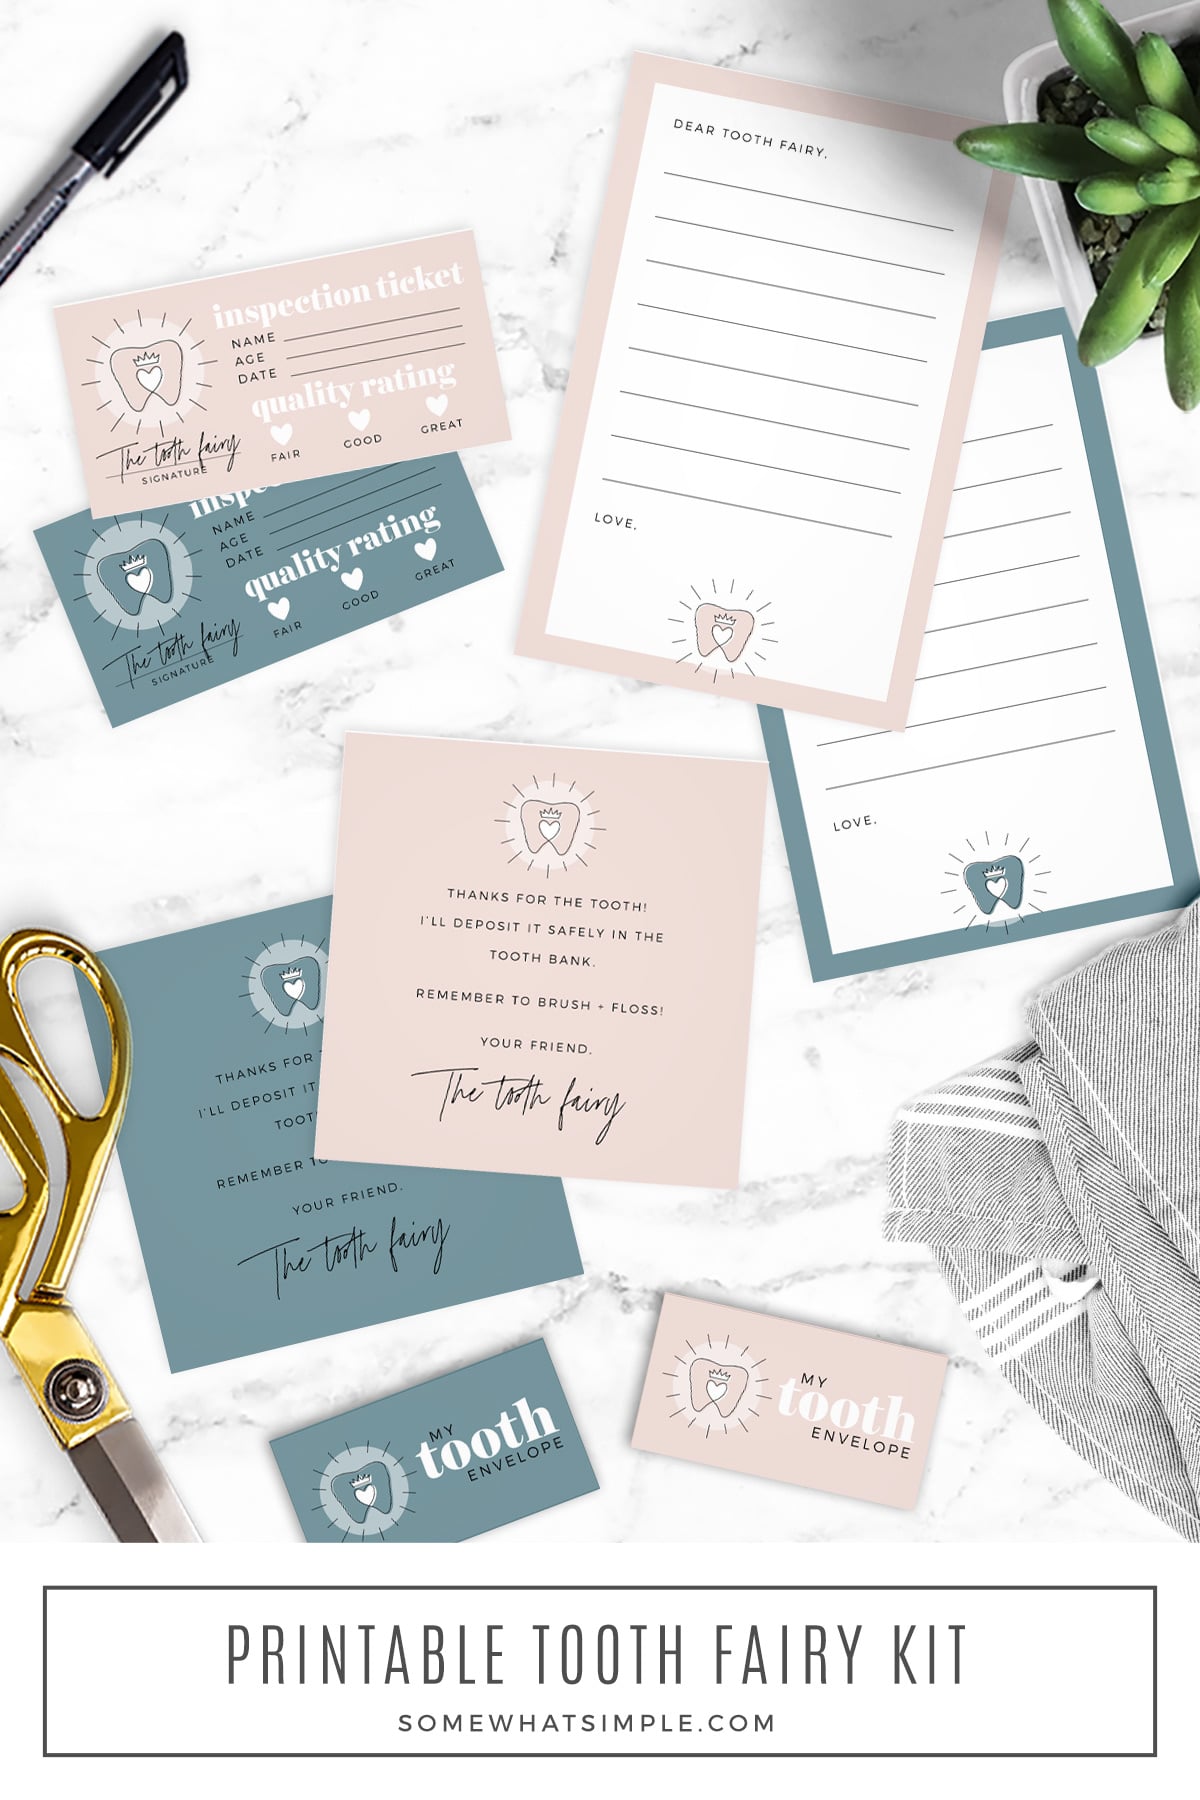 Printable Tooth Fairy Notes are a great way to celebrate the first tooth, second tooth, or last lost tooth! Download our letter set and get ready for some fun! via @somewhatsimple